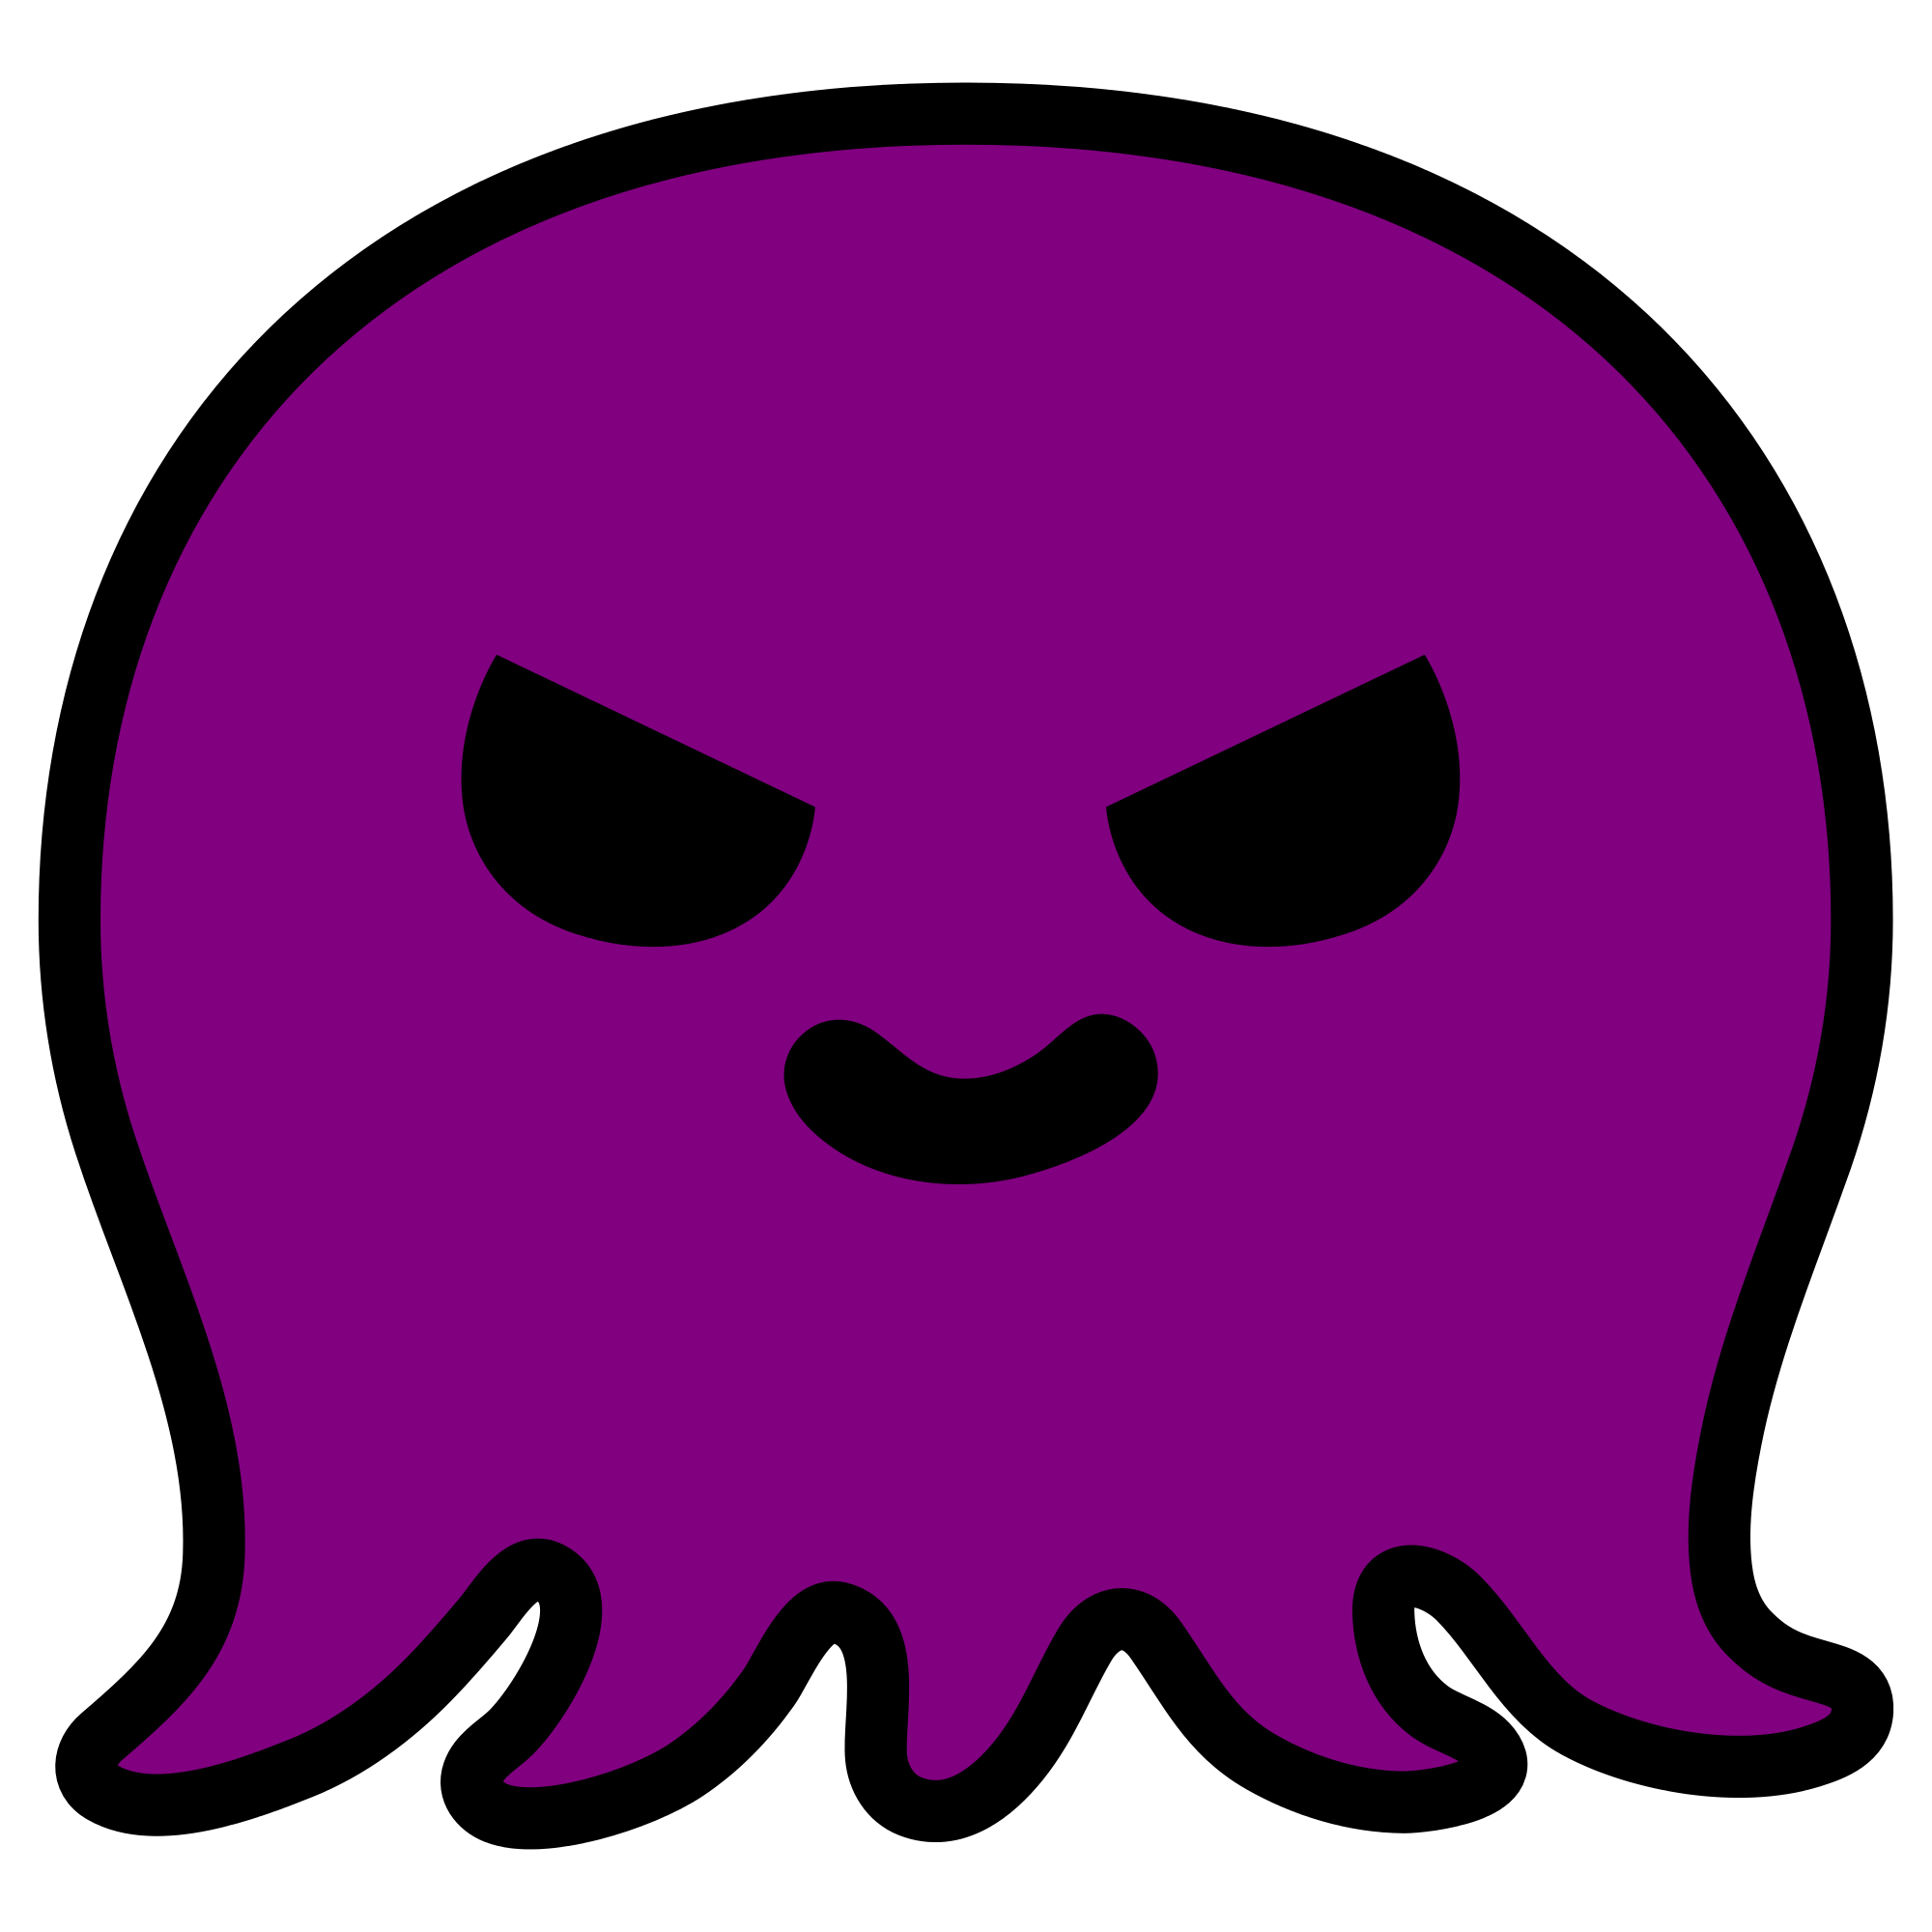 Monstro svg #7, Download drawings